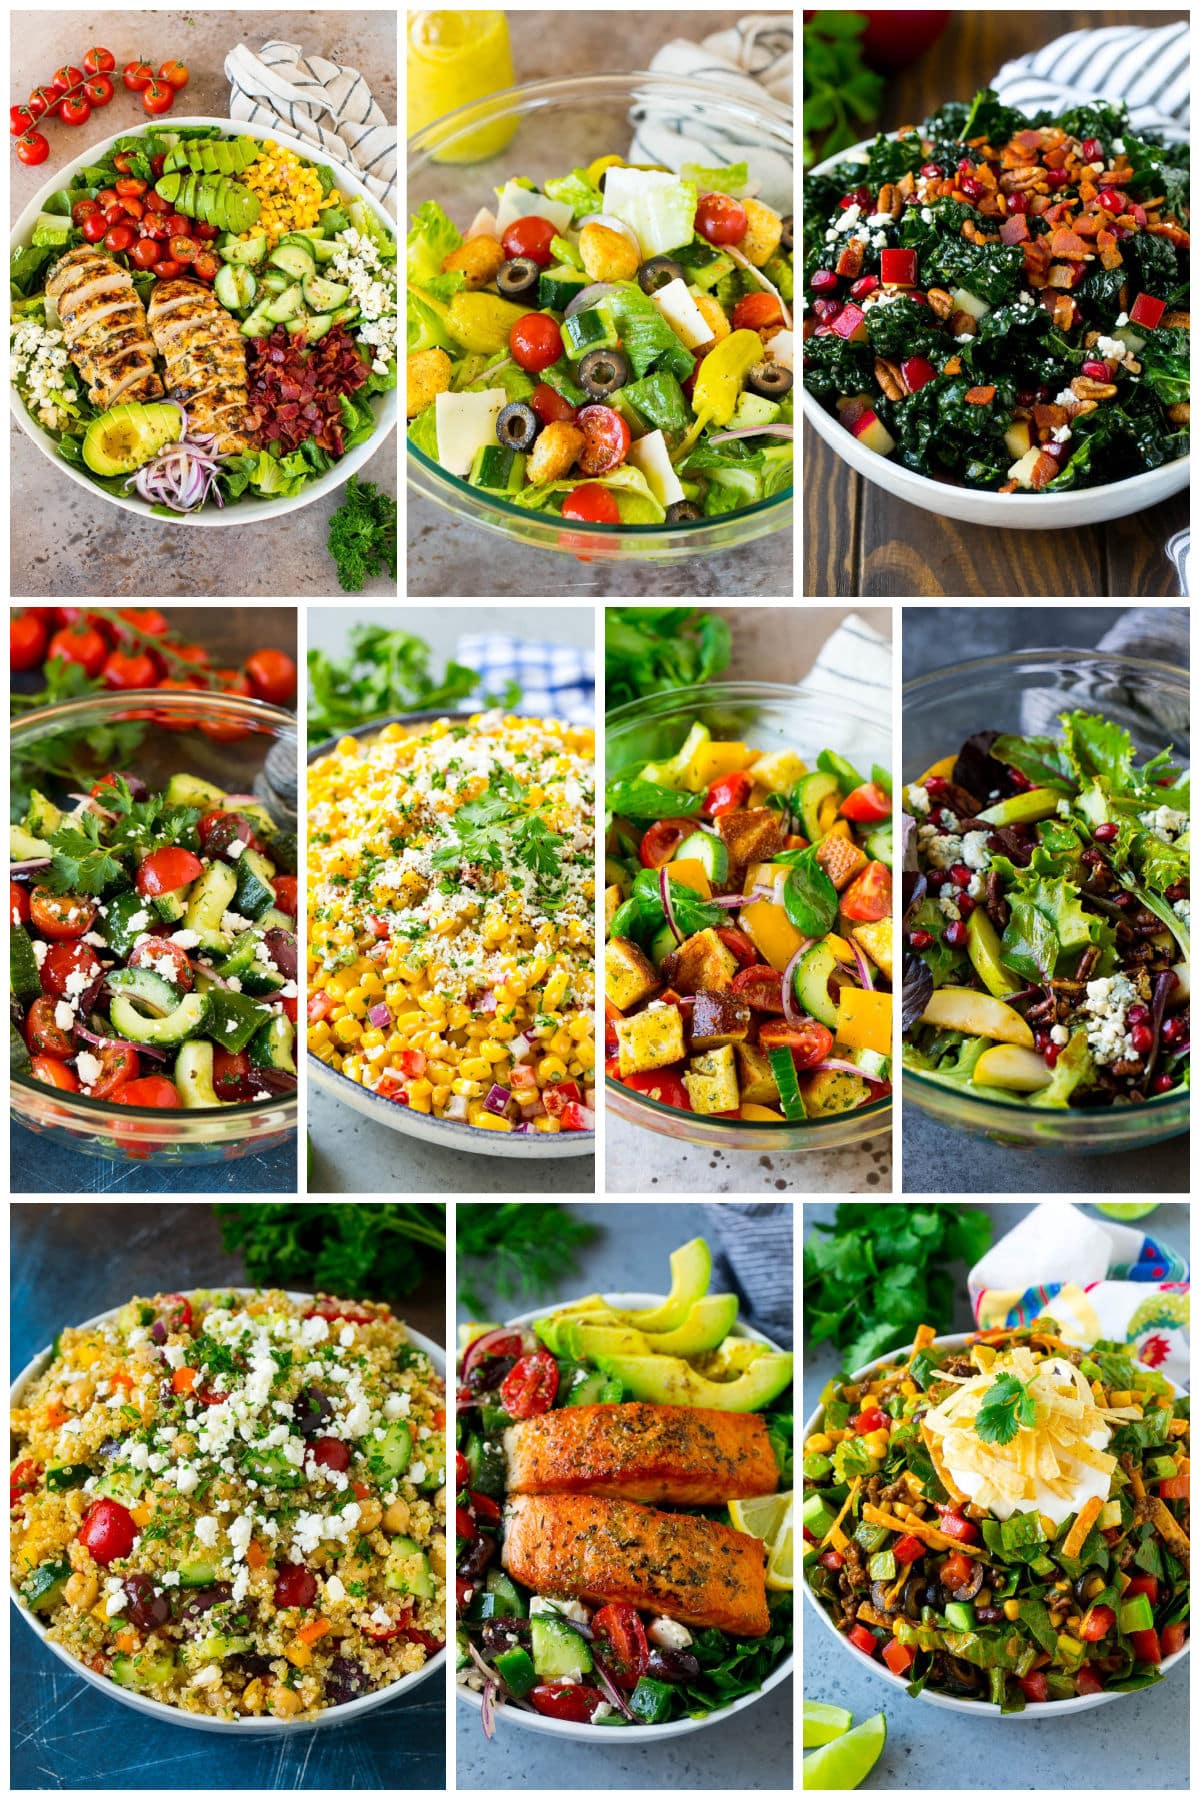 A group of nutritious fresh dishes including taco salad, pear salad and Mediterranean salad.